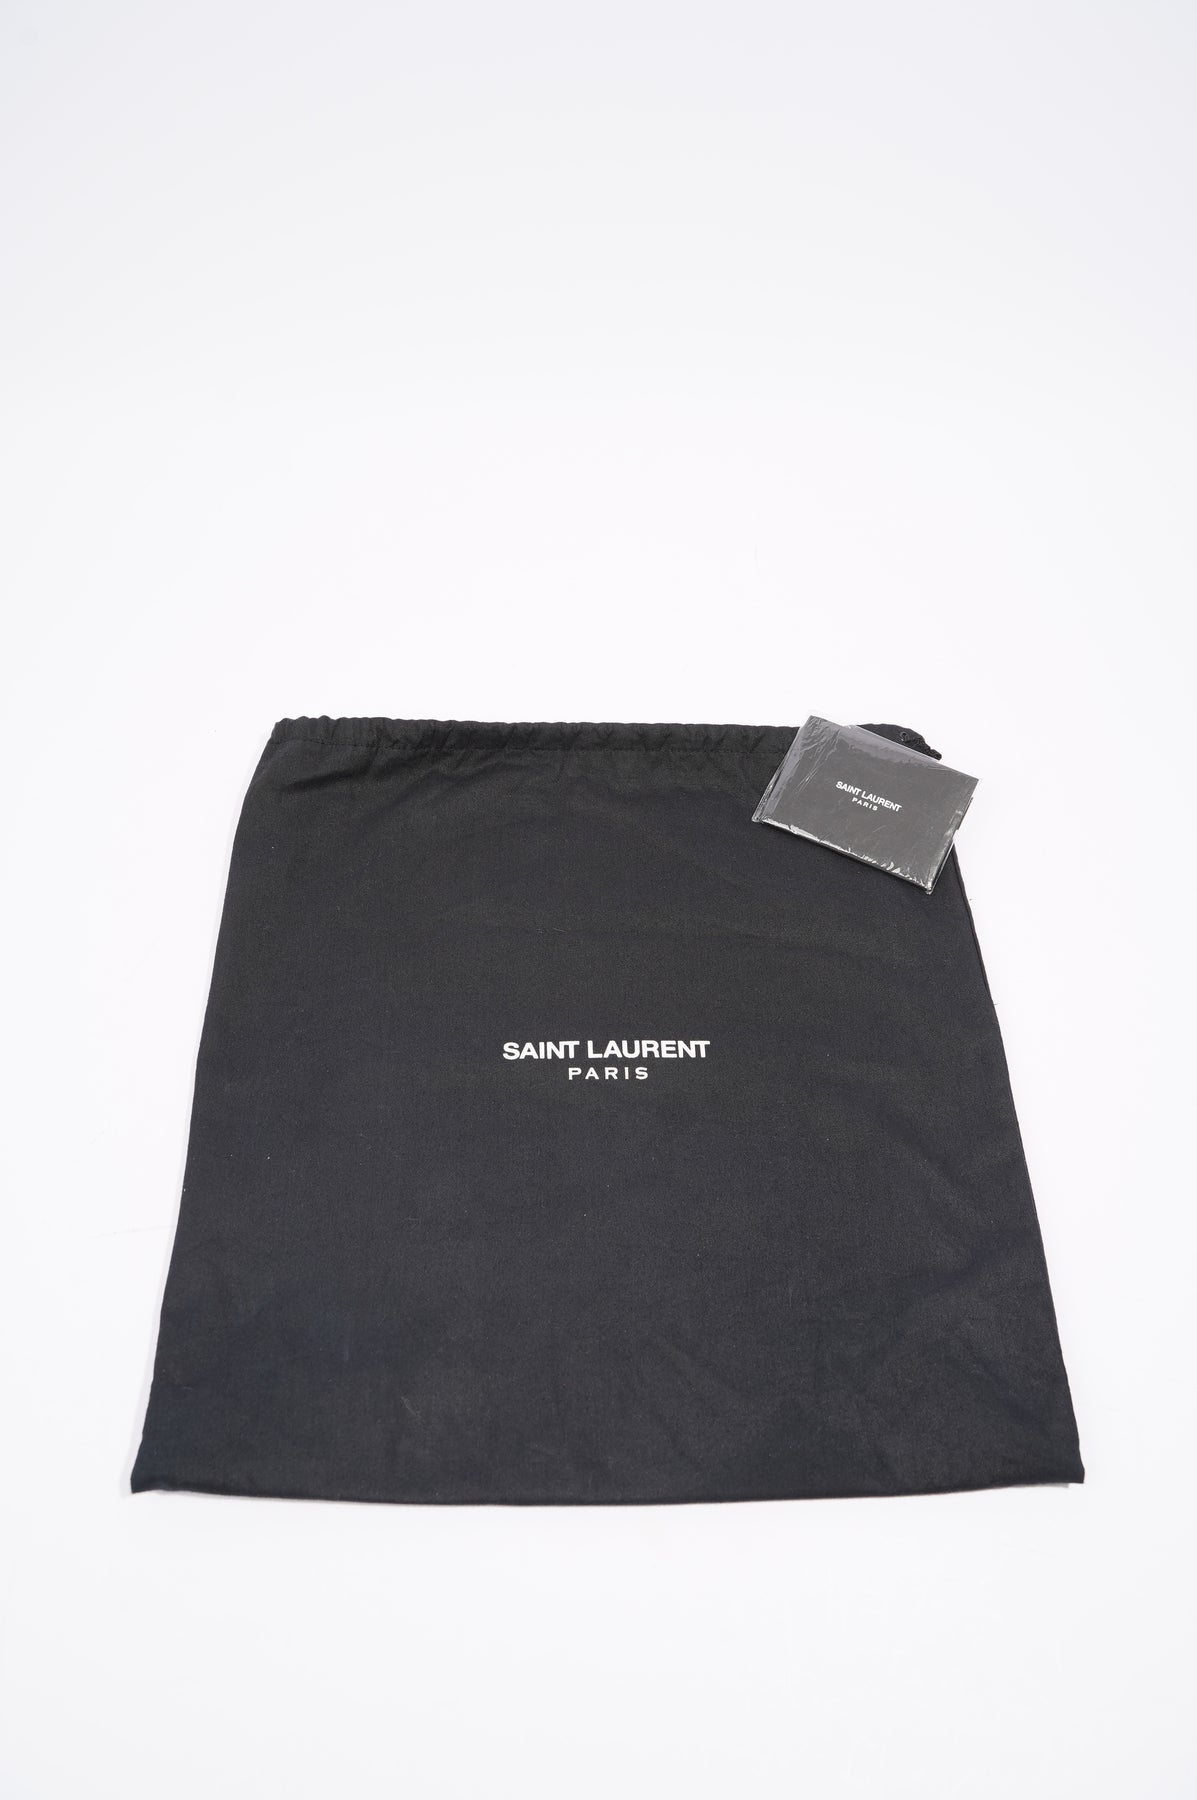 Luxe Du Jour - Real VS. Fake Louis Vuitton dustbag Can you tell